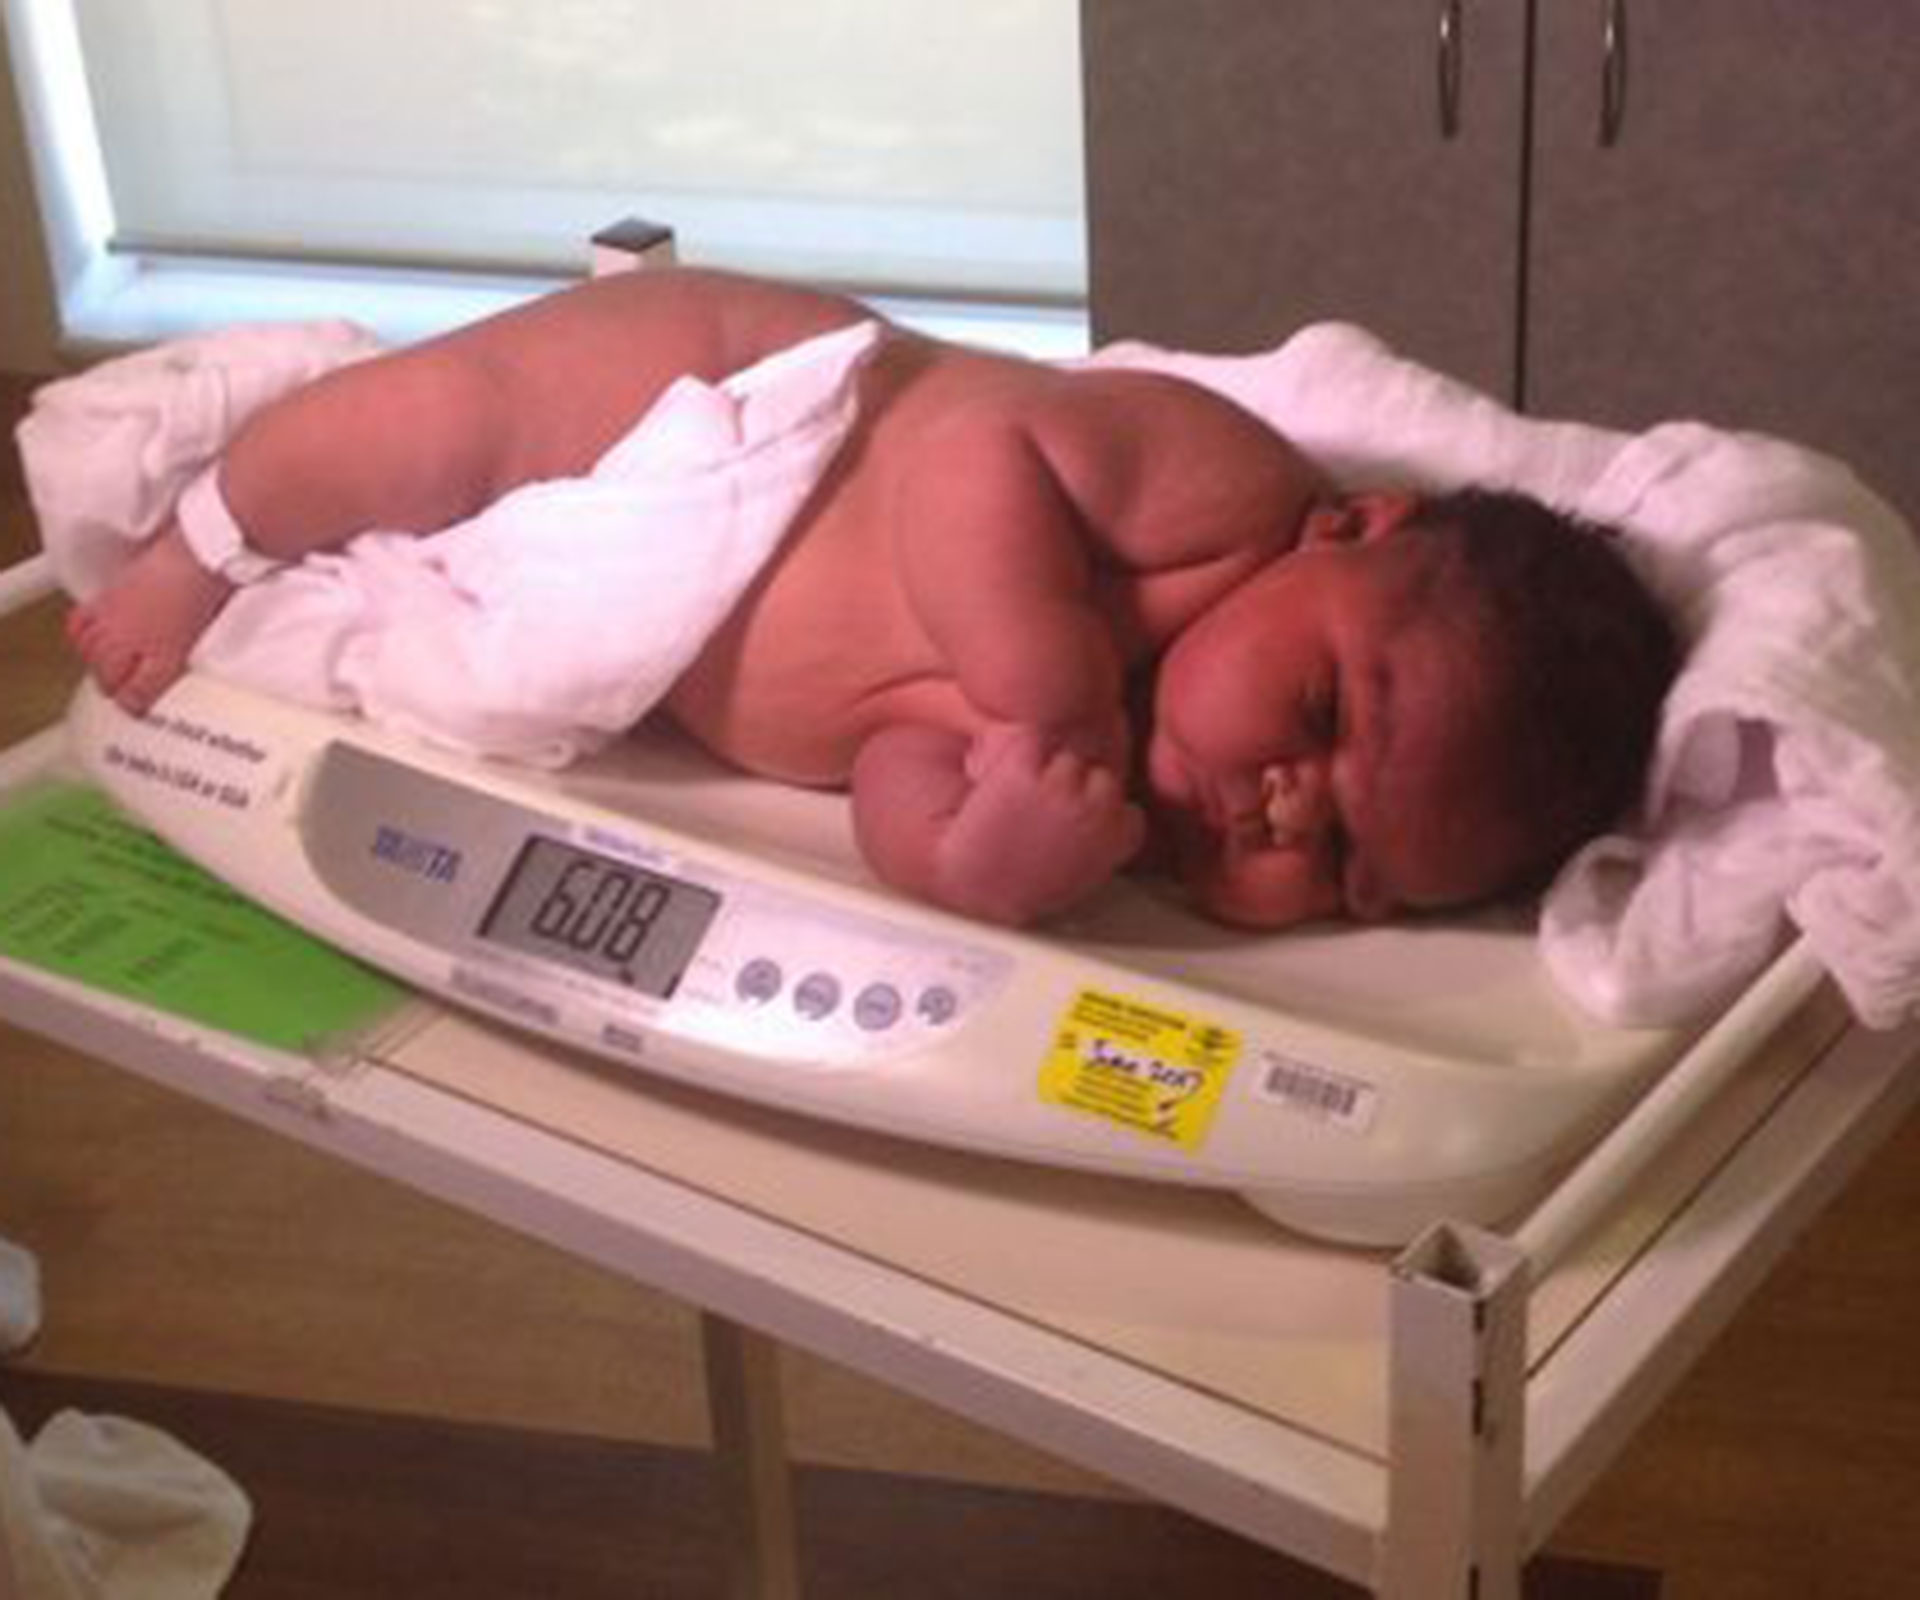 Mum from Victoria gives birth to six kilo baby… with only gas and air for relief